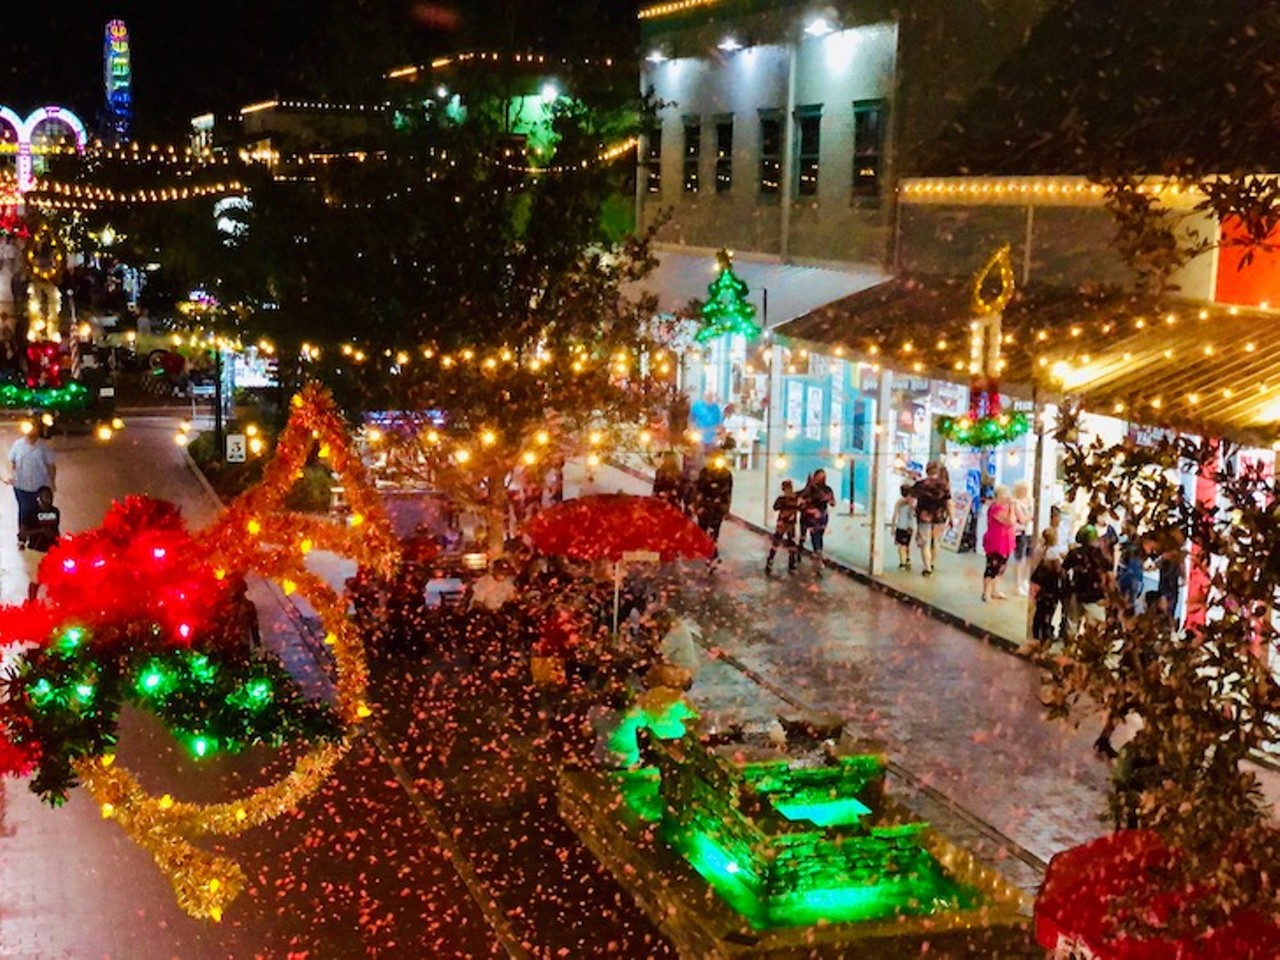 Holidays at Old Town  
Old Town, 5770 West Irlo Bronson Memorial Hwy, Kissimmee, 407-396-4888
The Kissimmee entertainment complex once again raises its iconic Christmas tree, and its brick streets will be coated in &#147;snow&#148; every weekend from Dec. 1-25.
Photo via Old Town/Website